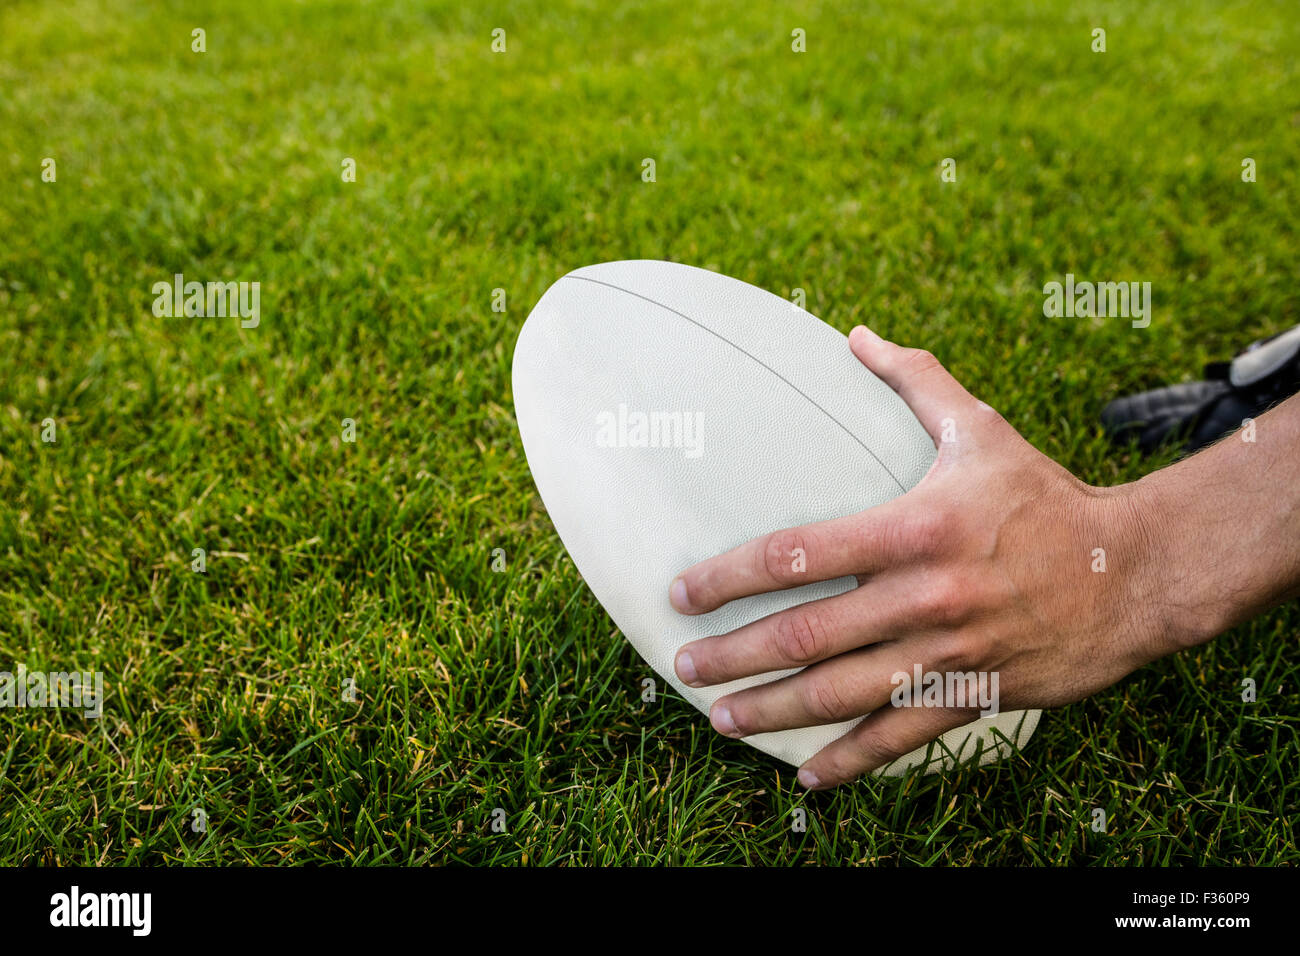 Rugby player picking up ball Stock Photo